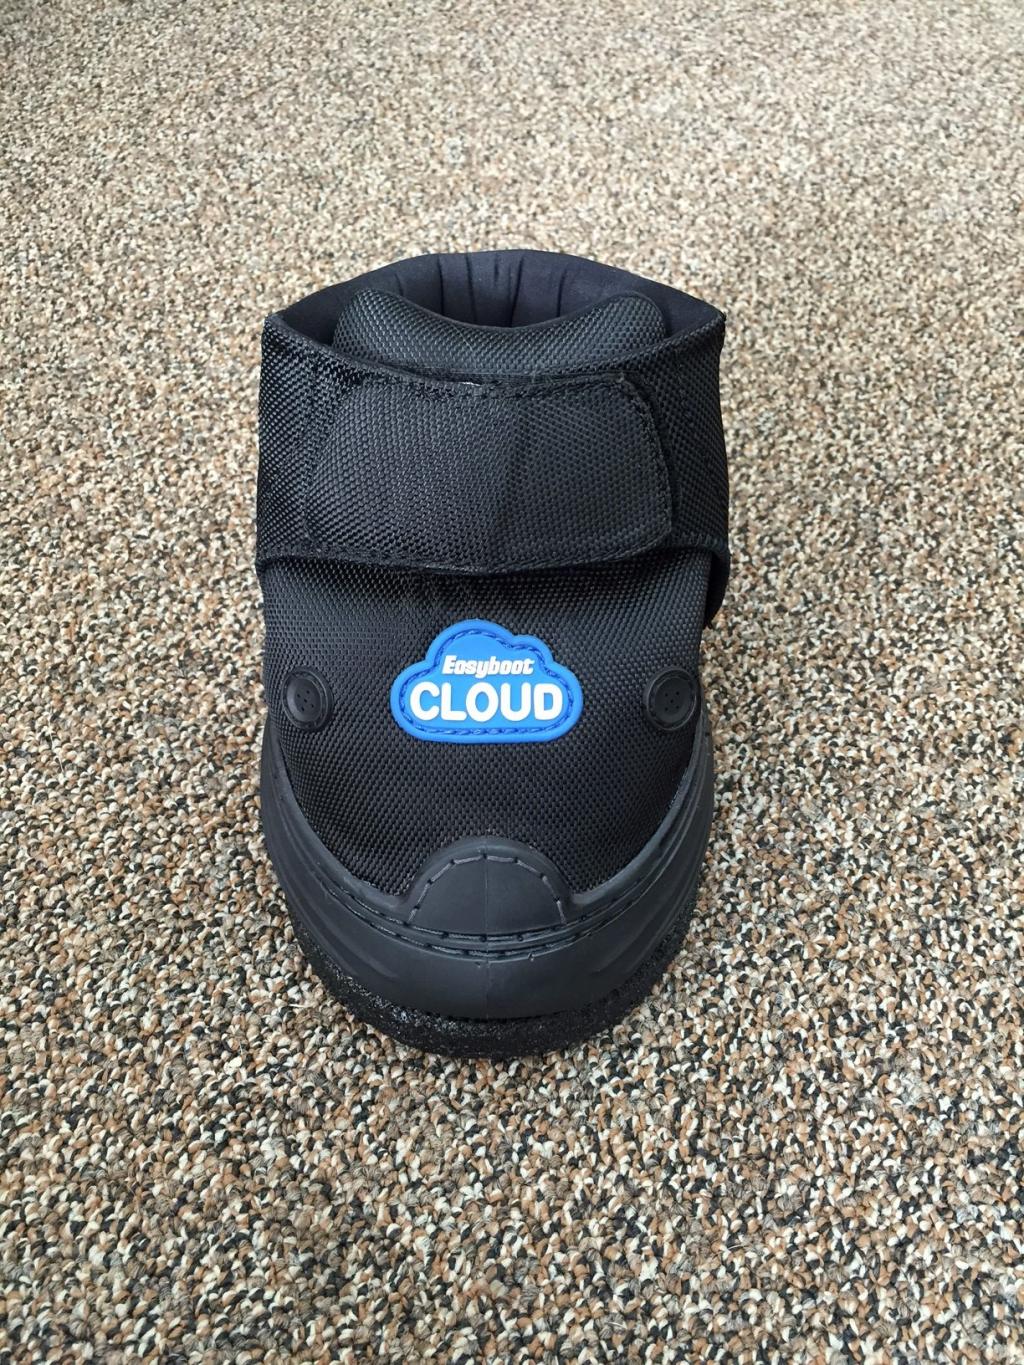 easyboot clouds